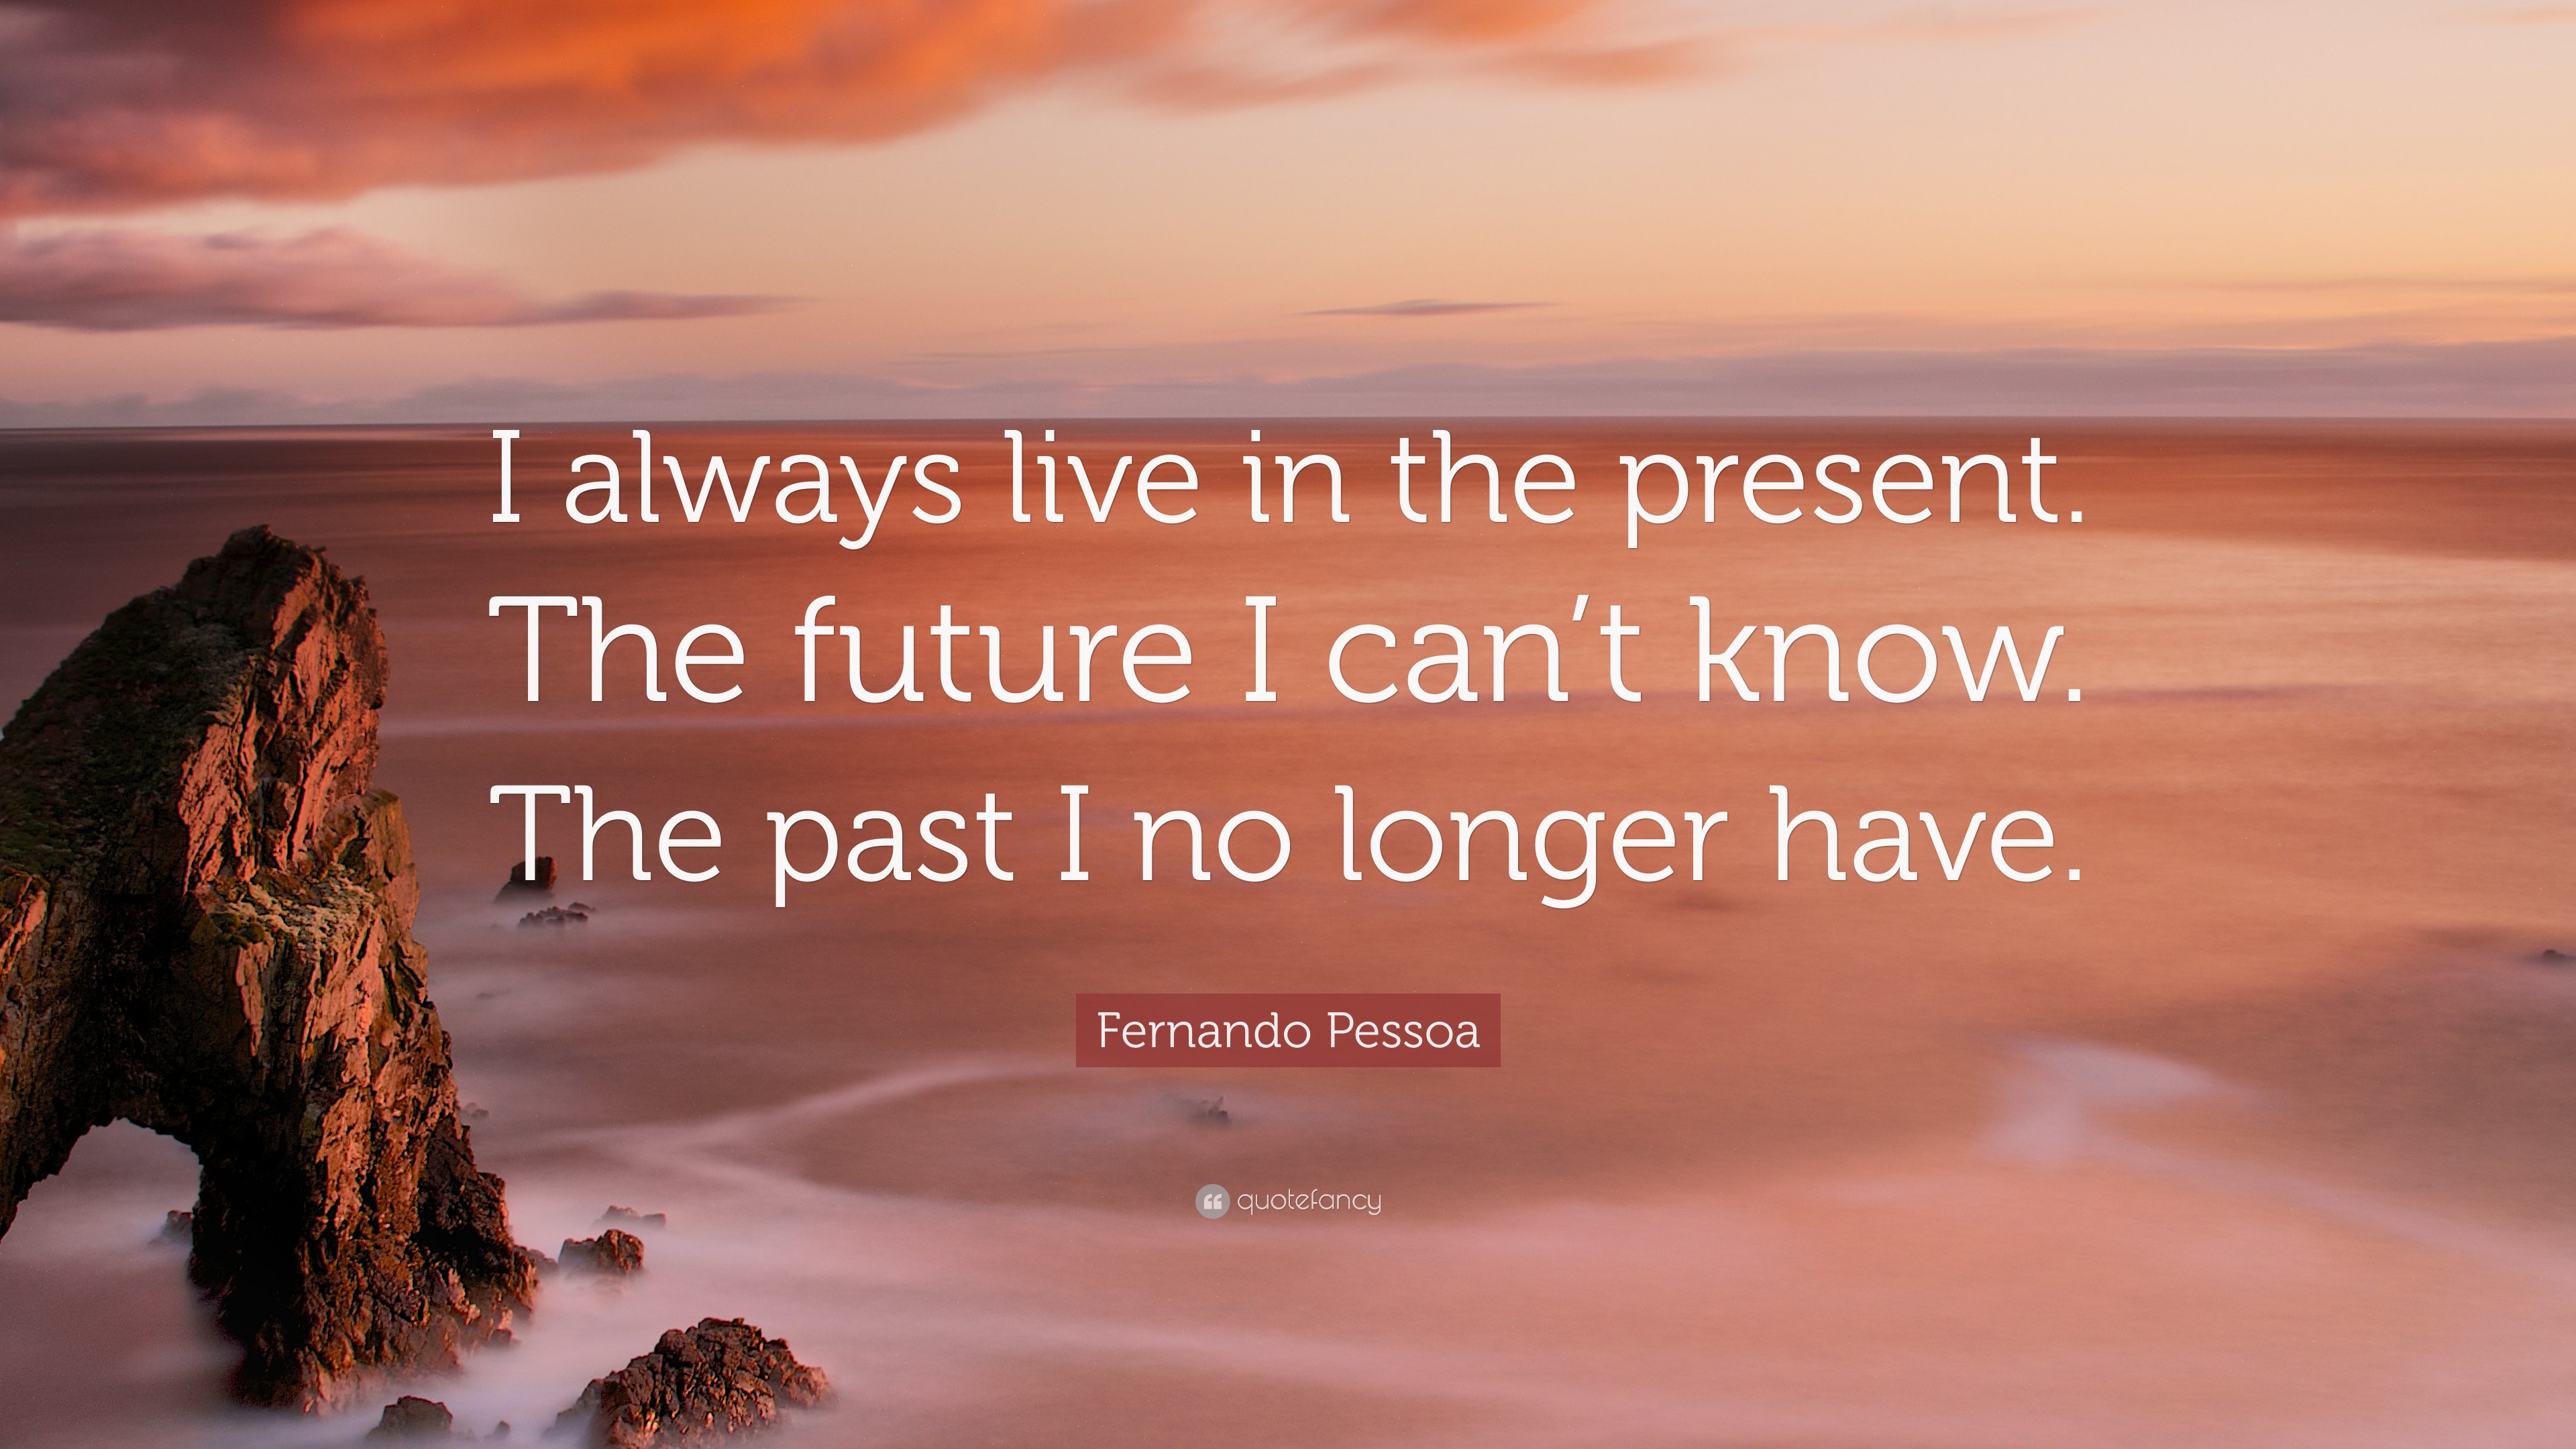 Fernando Pessoa Quote: “I always live in the present. The future I can